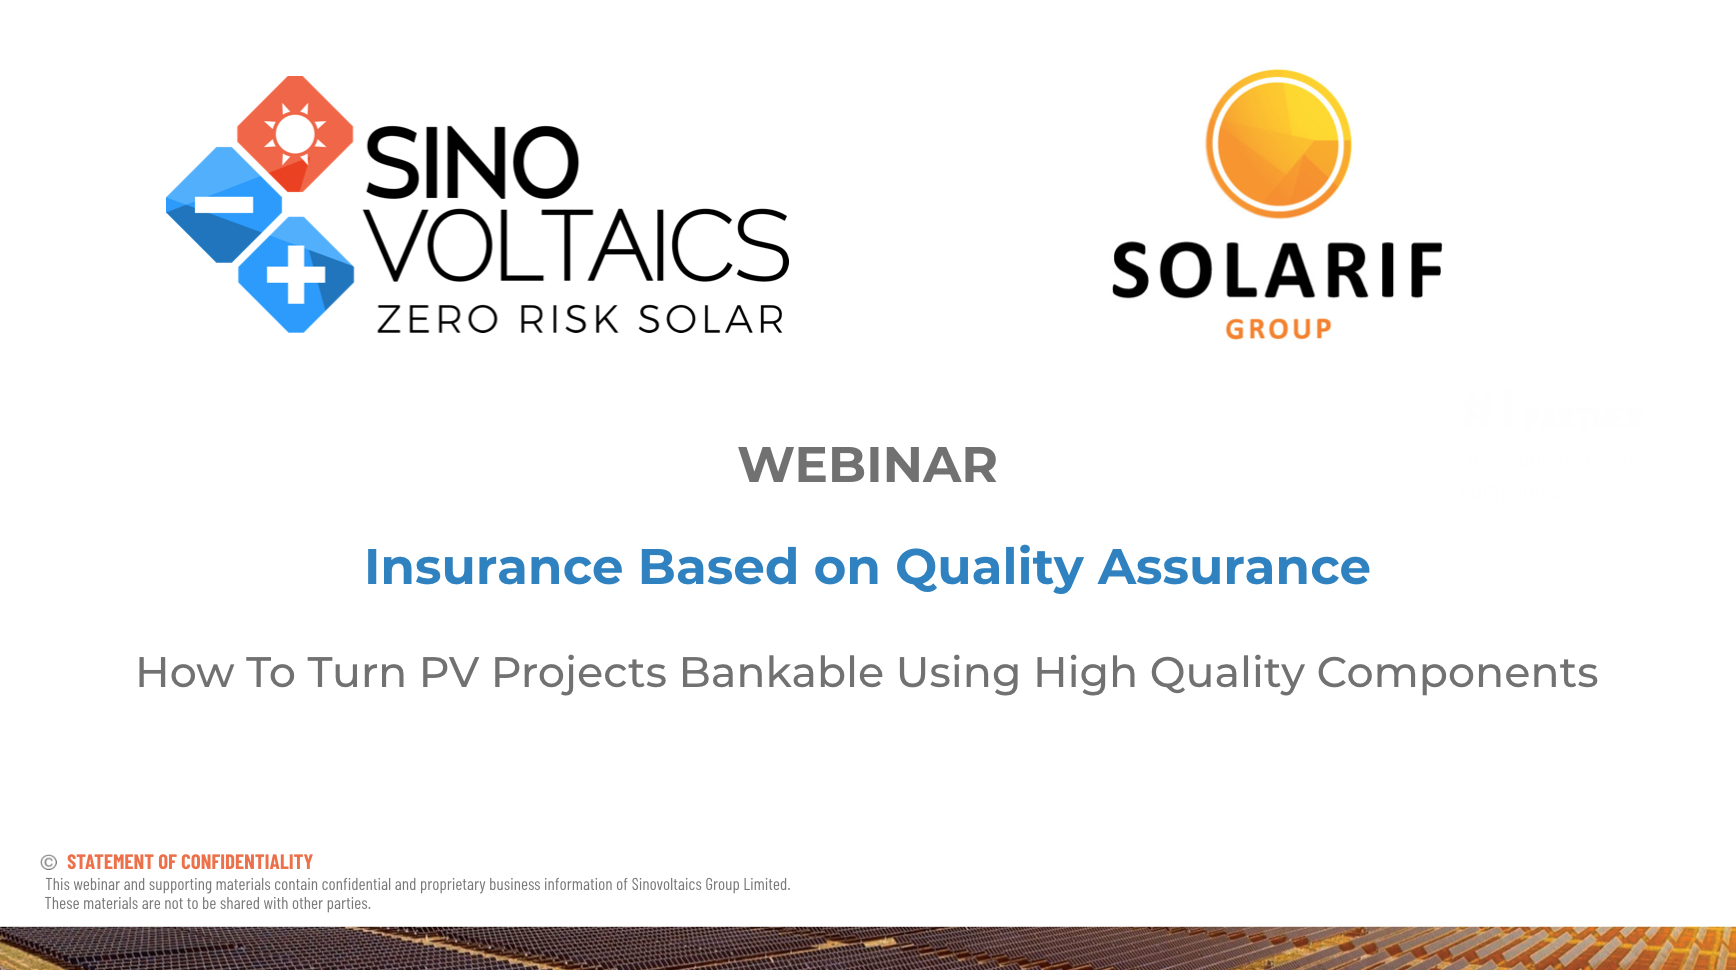 How to turn PV projects bankable using high quality components.